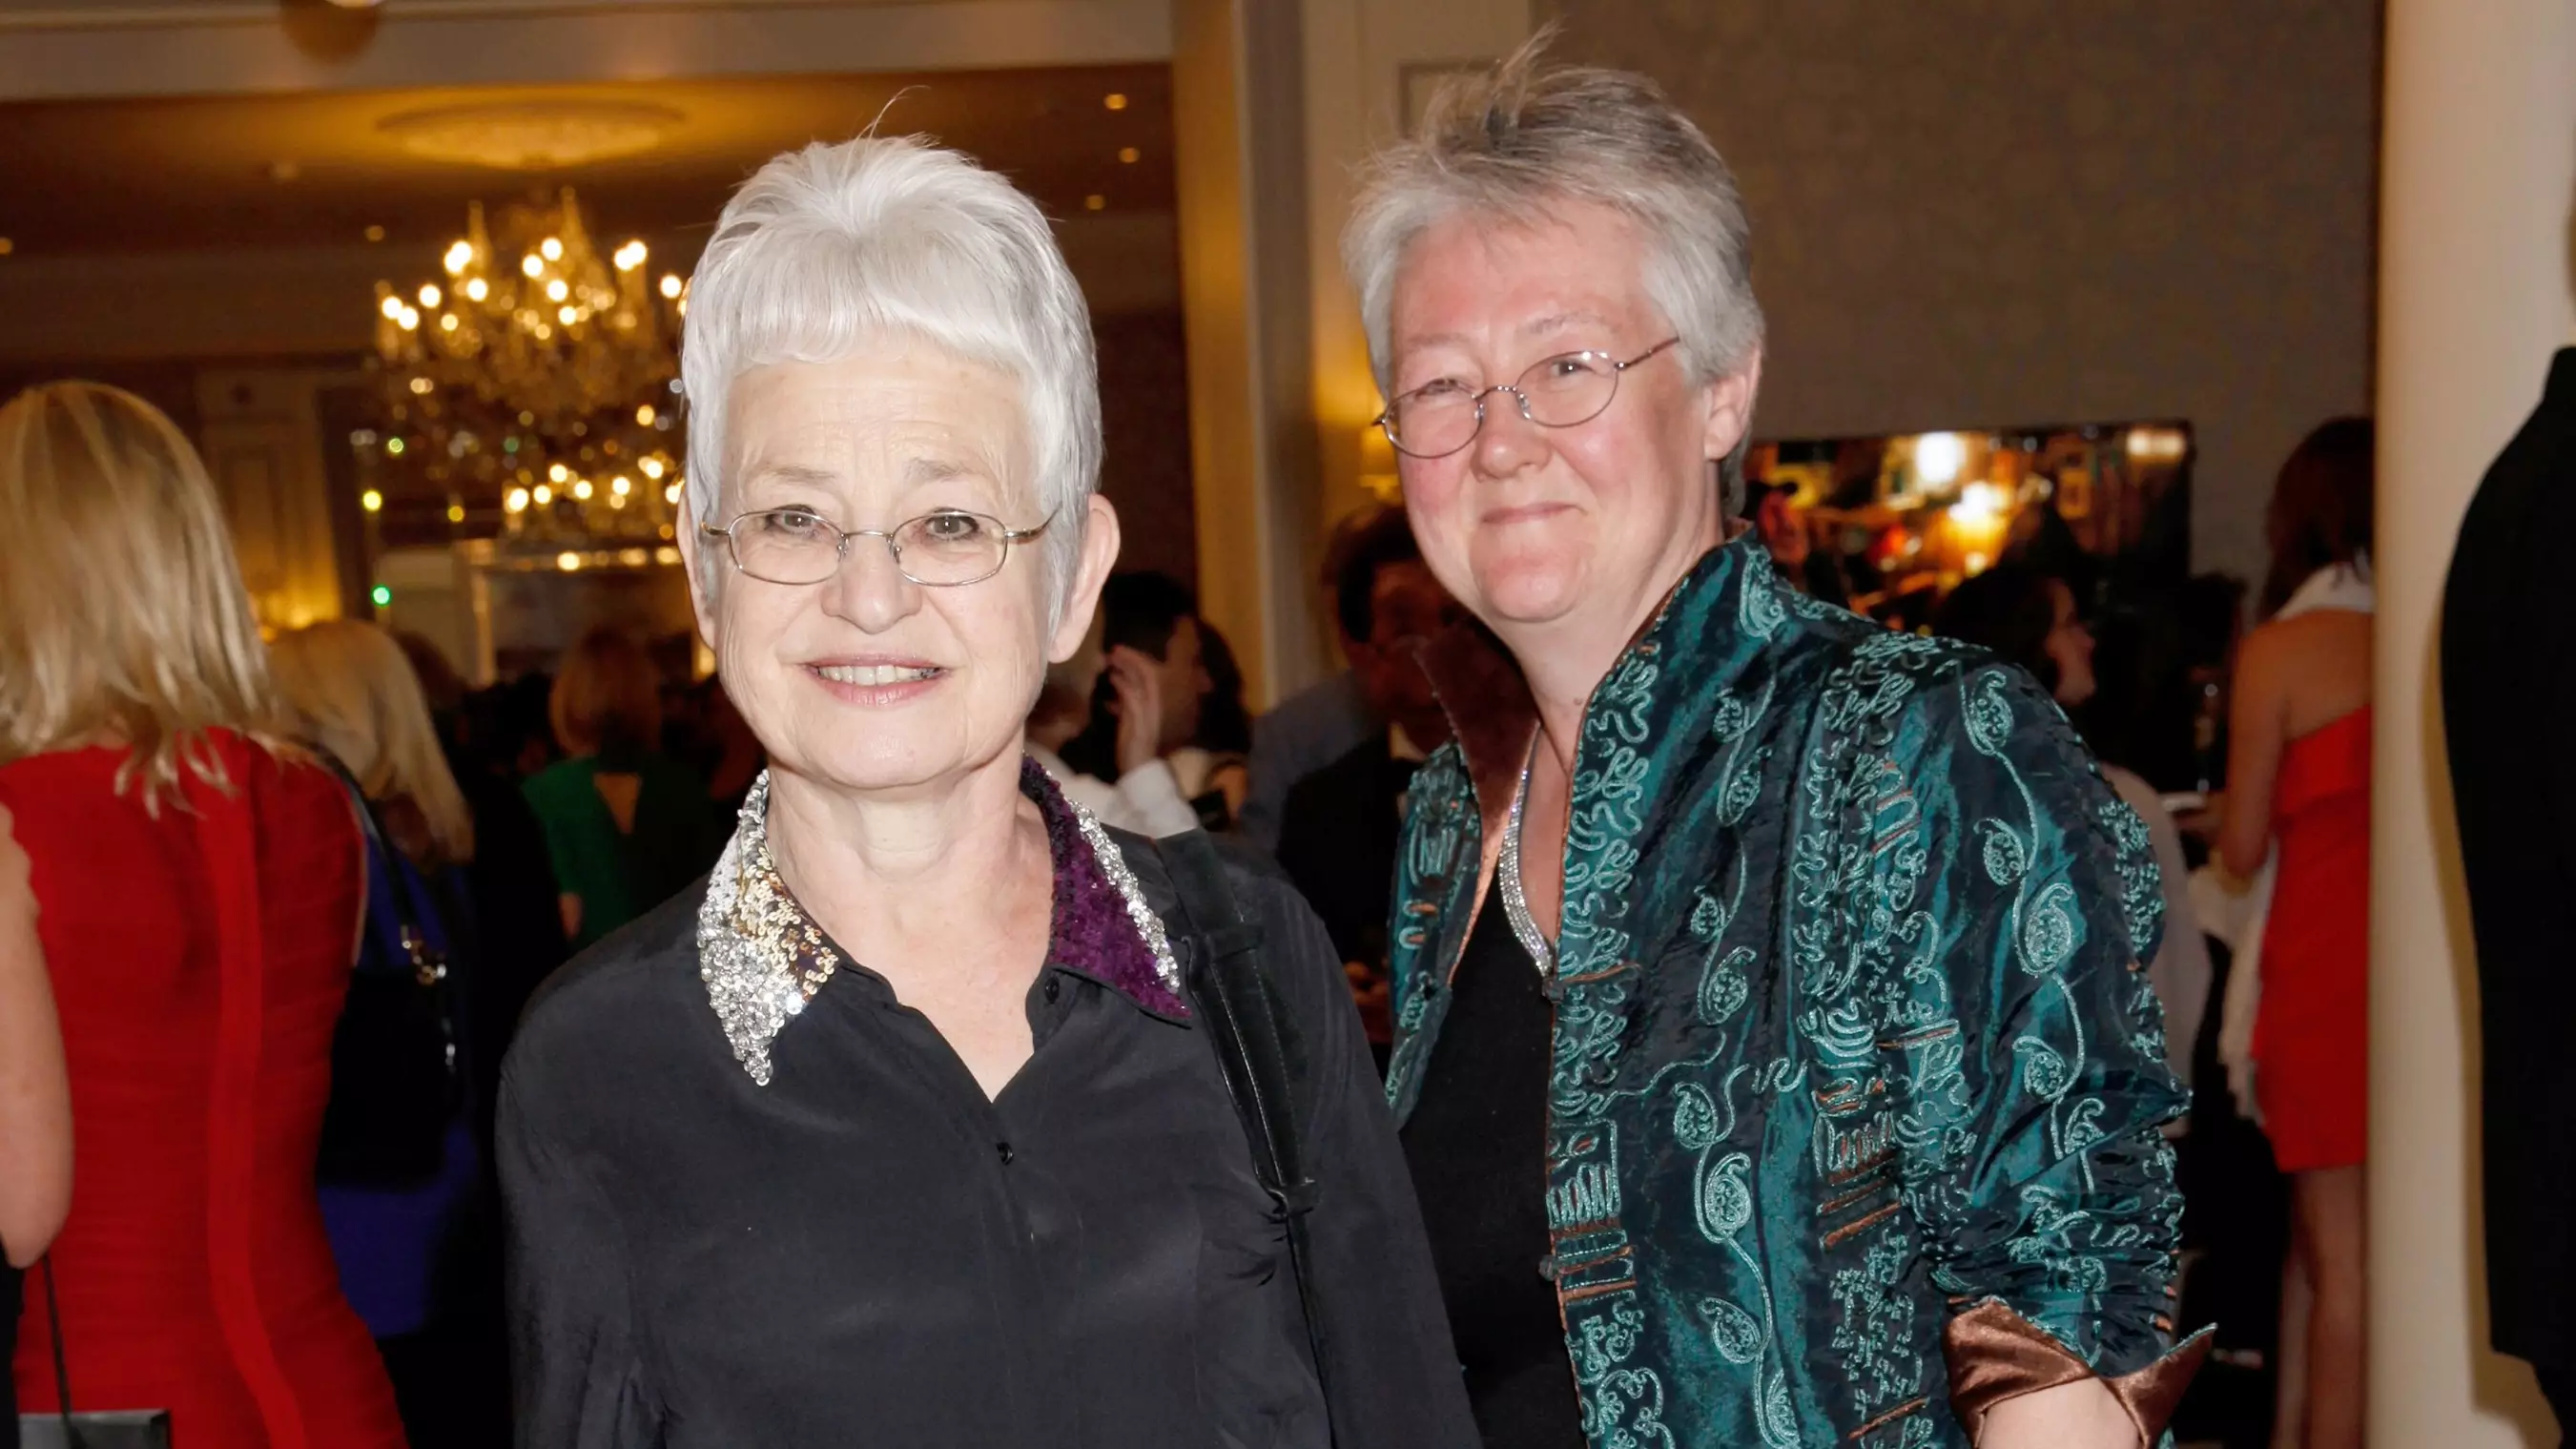 Jacqueline Wilson Publicly Confirms She's Been In Relationship With Woman For 18 Years